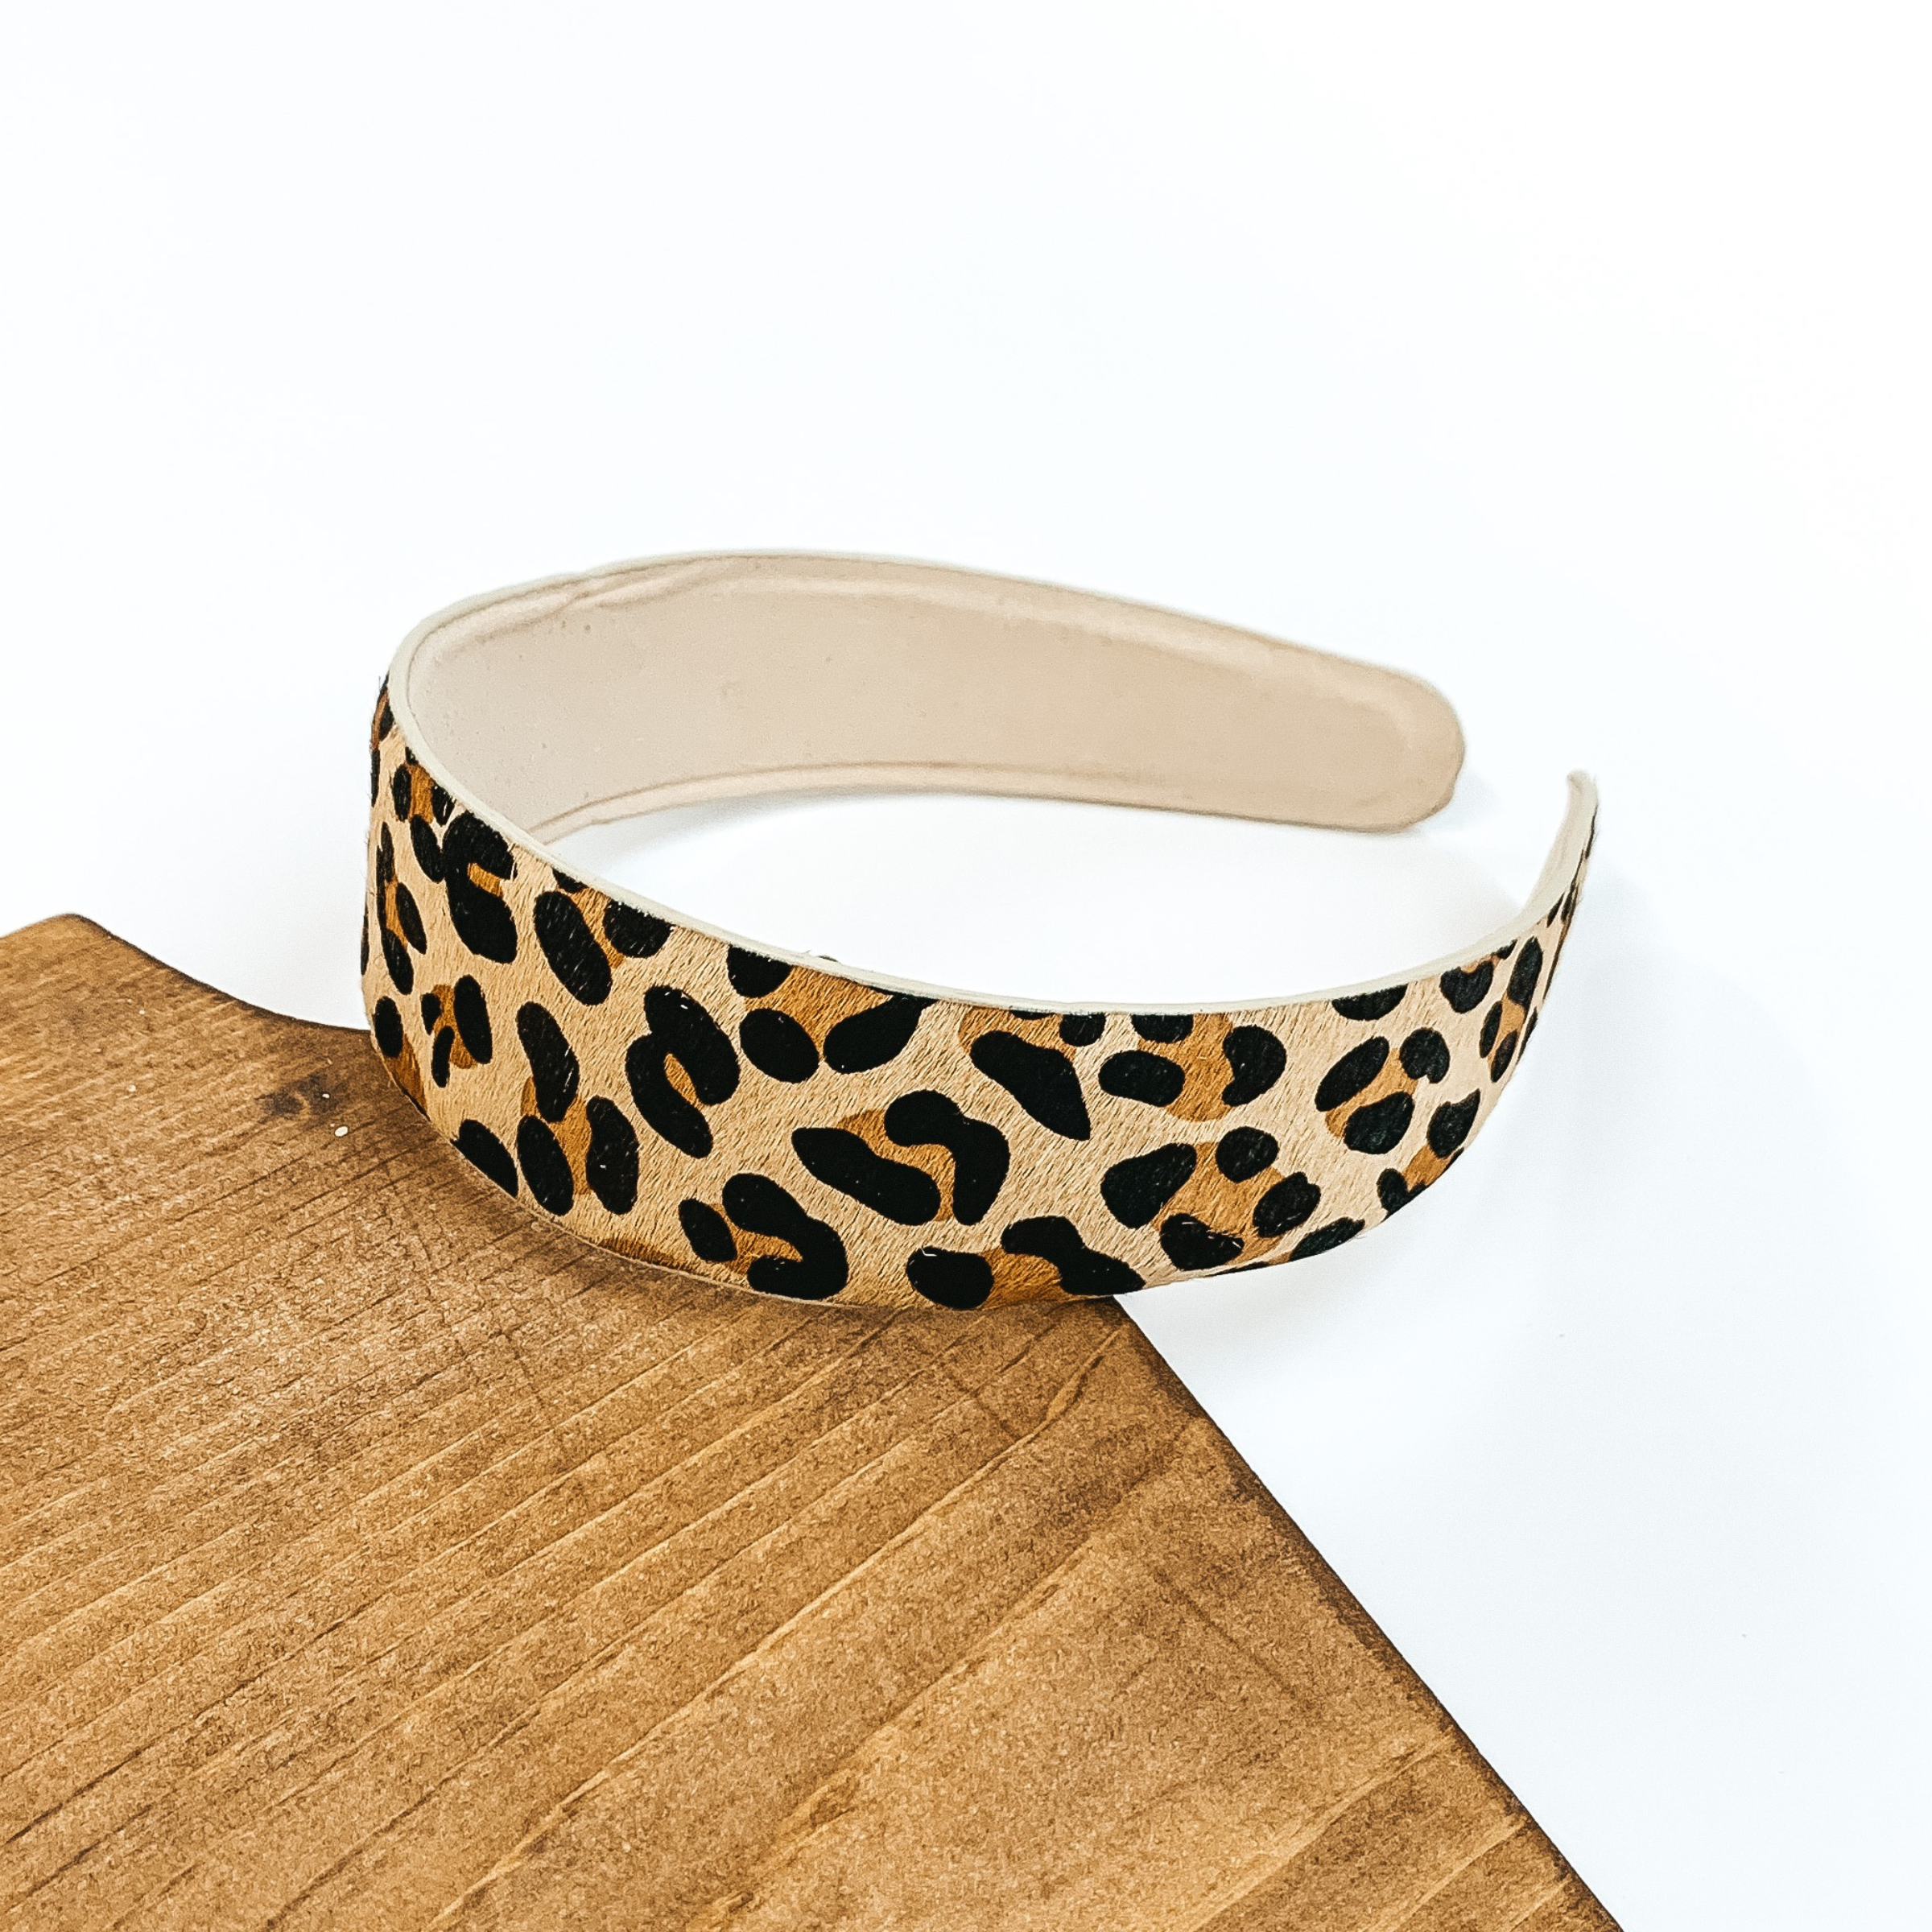 Leopard print headband and an ivory underside. This headband is pictured laying partially on some dark wood on a white background.